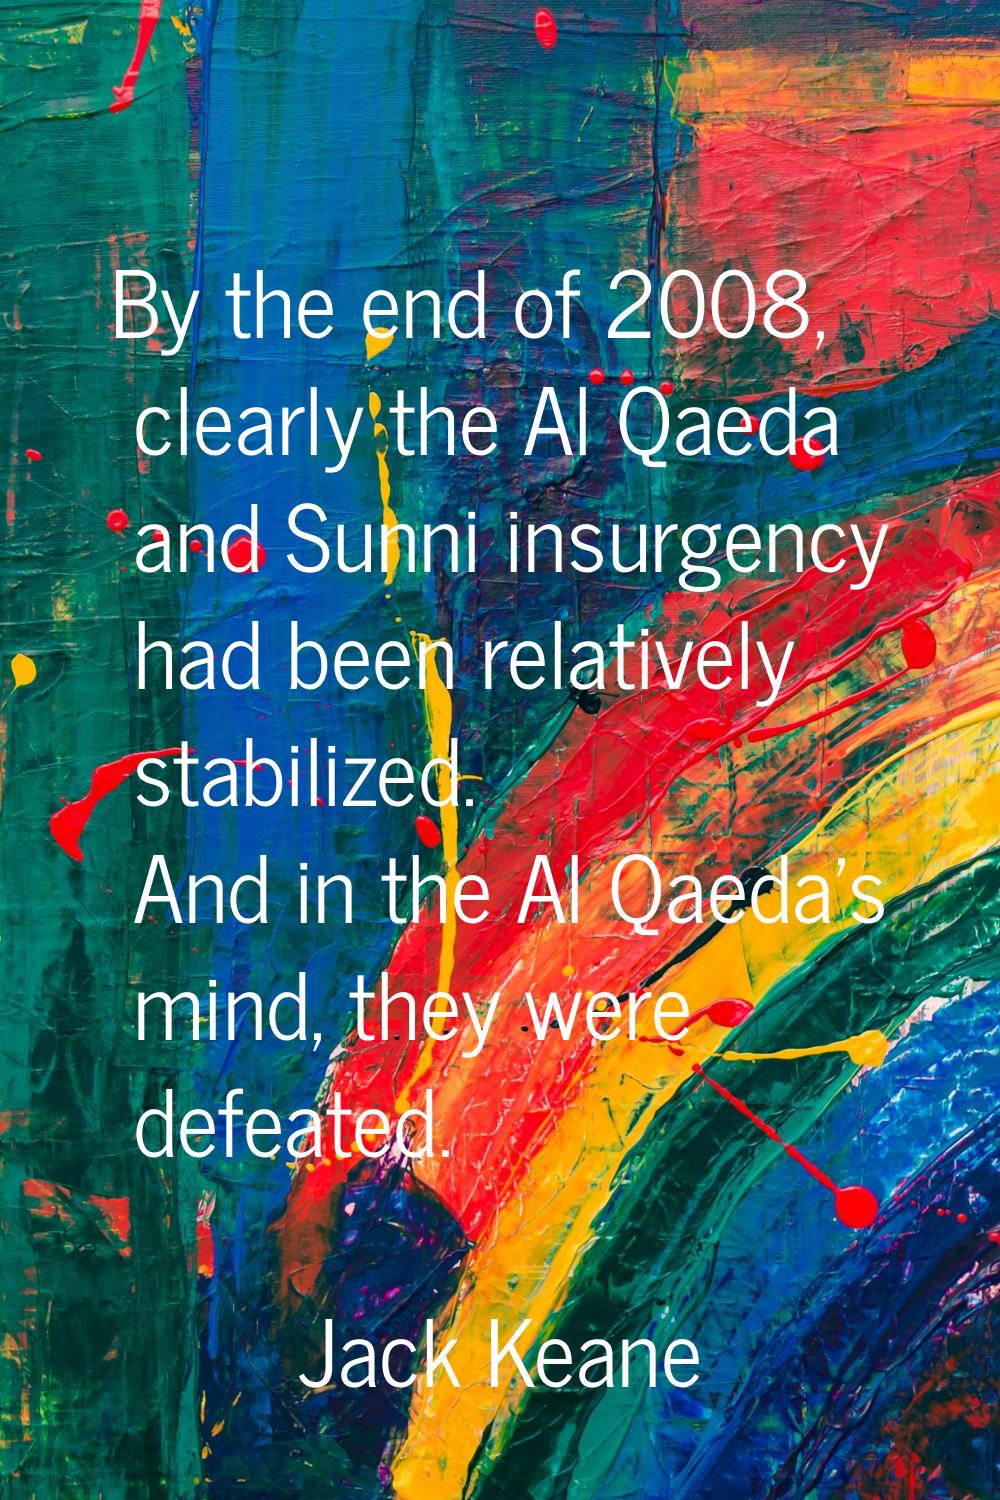 By the end of 2008, clearly the Al Qaeda and Sunni insurgency had been relatively stabilized. And i